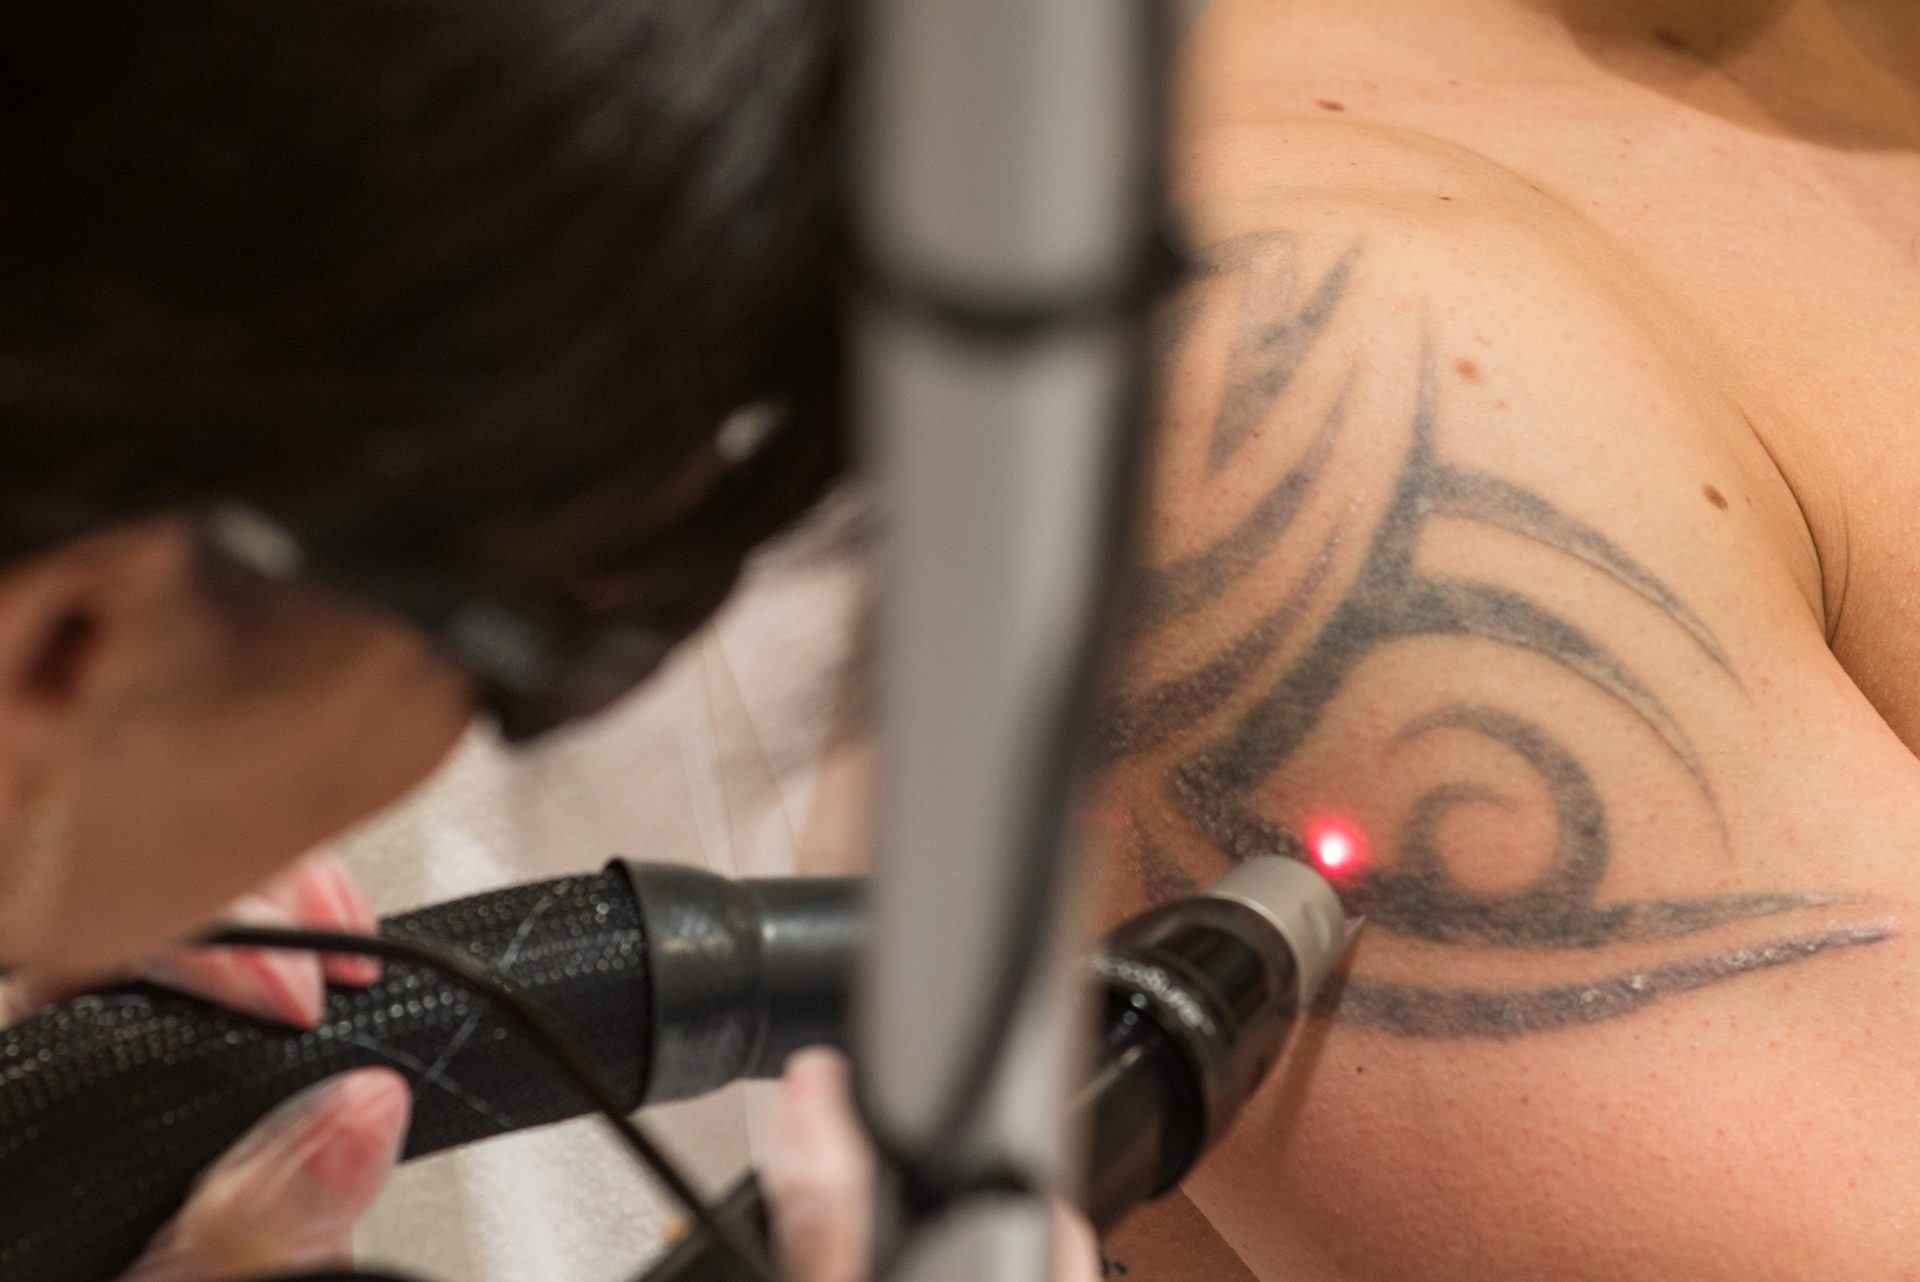 Non laser tattoo removal dangers